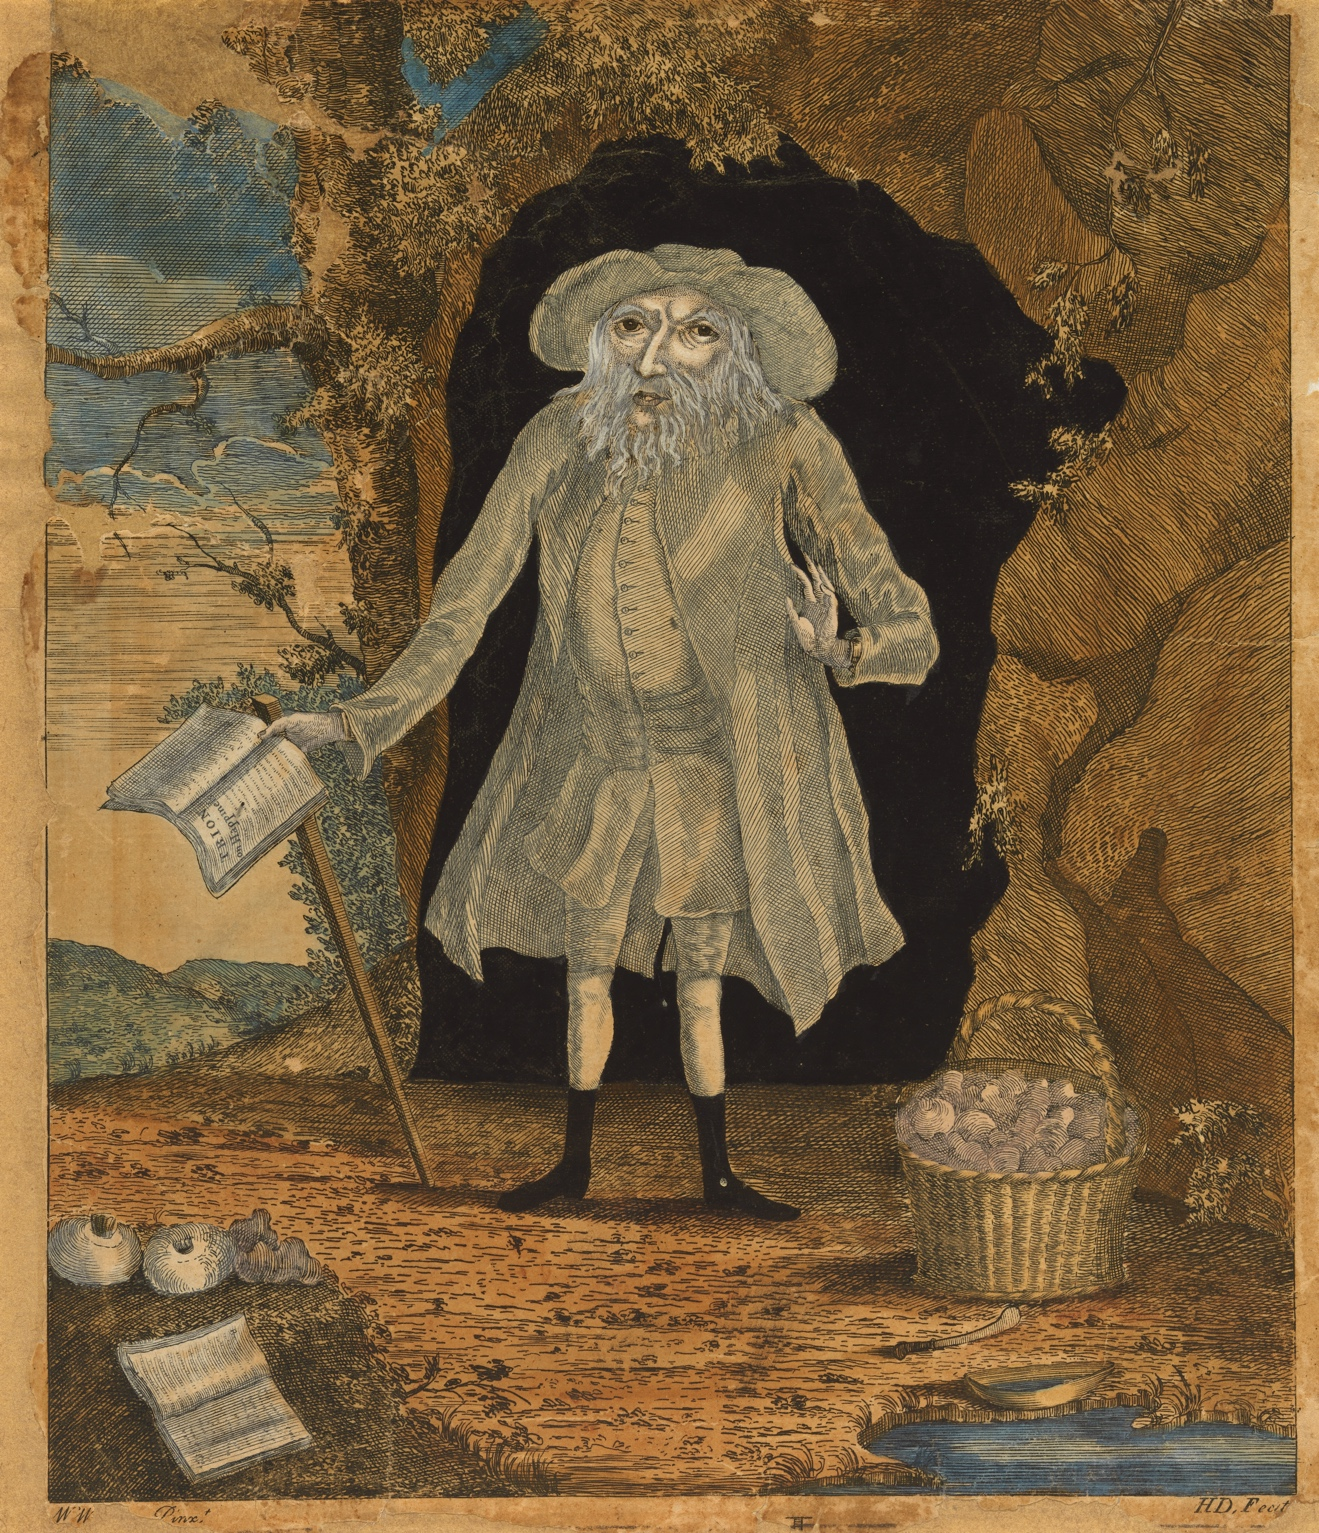 Image of an etching showing an older man with a white beard standing in front of the mouth of a cave with a cane and a book in his reight hand